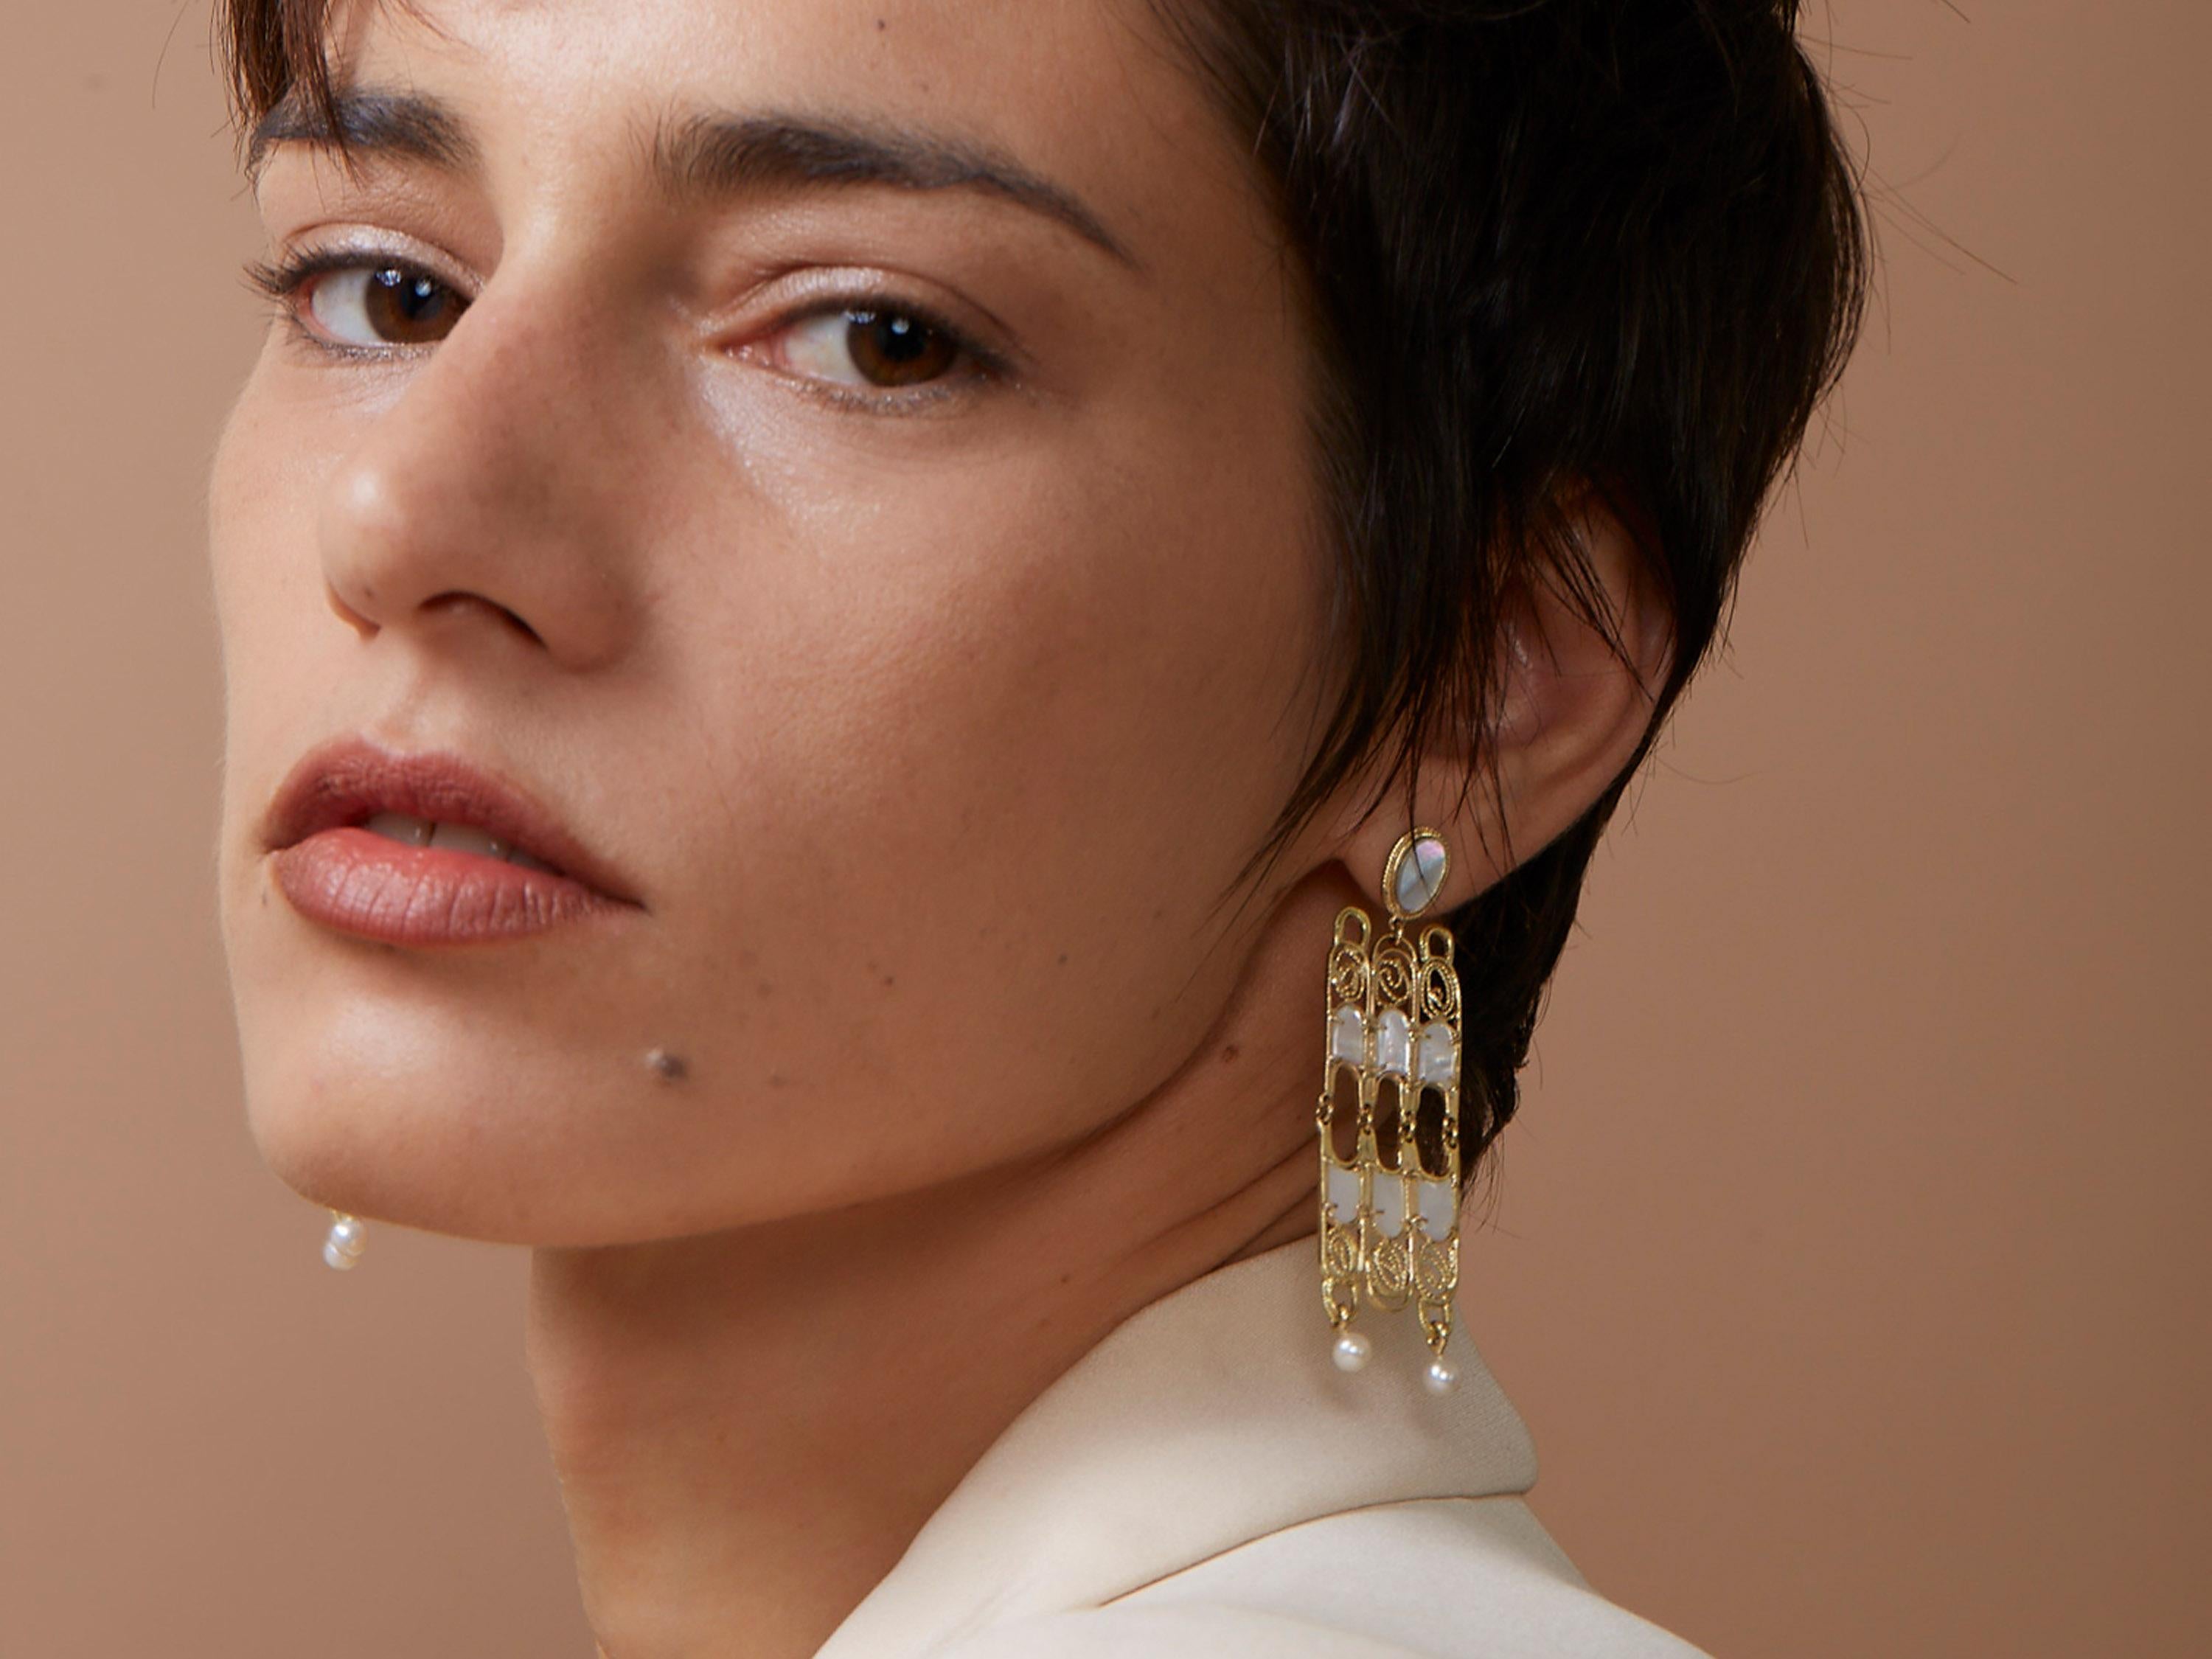 Make an elegant and bold statement in these large chandelier style earrings. Crafted in the ancient filigree method where gold wires are arranged into patterns and fused together to create lightweight frames. These earrings feature hand cut mother